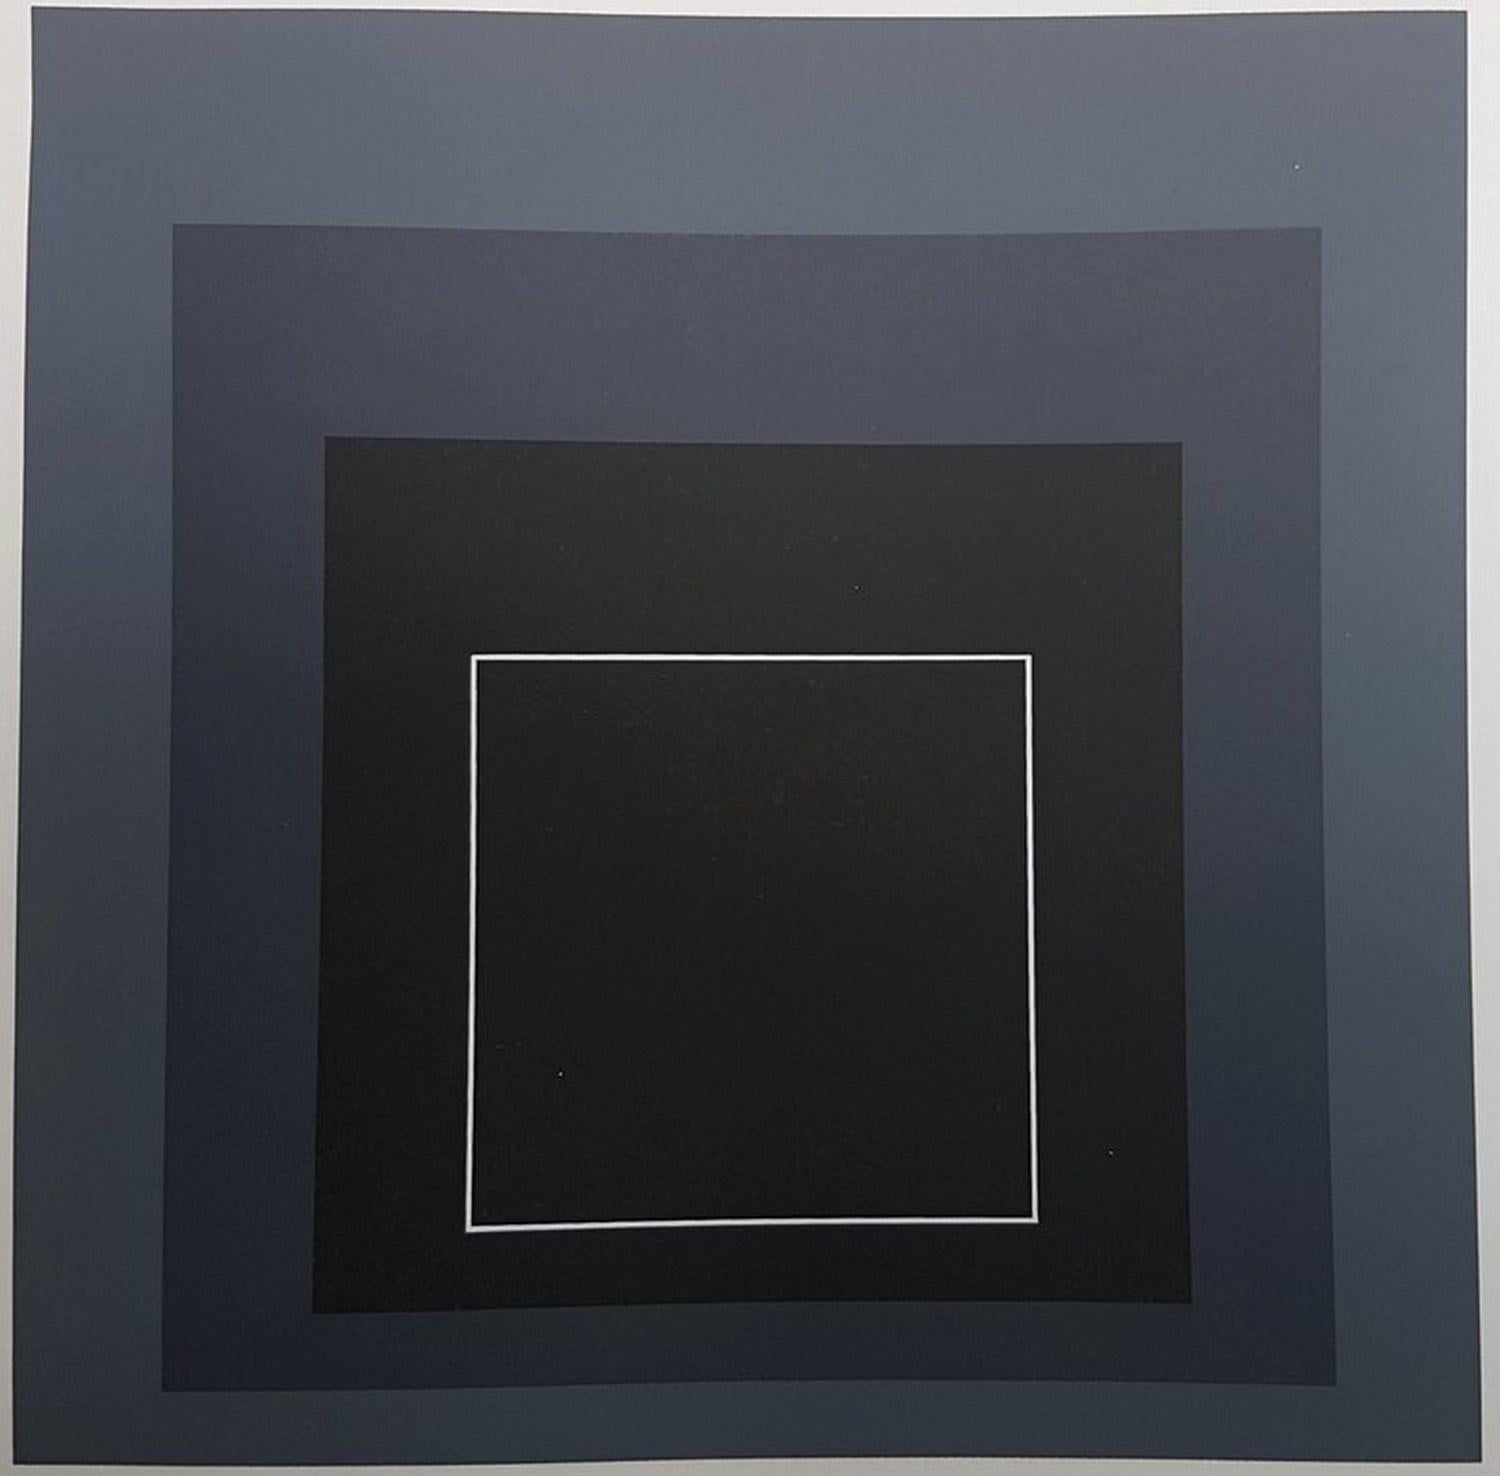 Josef Albers
Homage to the Square (Hommage au Carre)  (Bauhaus, Geometric Abstraction)
Screenprint in brilliant Colors on wove paper
Year: 1972
From “Josef Albers: Son Oeuvre et Sa Contribution à Figuration Visuelle Au Cours Du XXe Siècle”
Printed